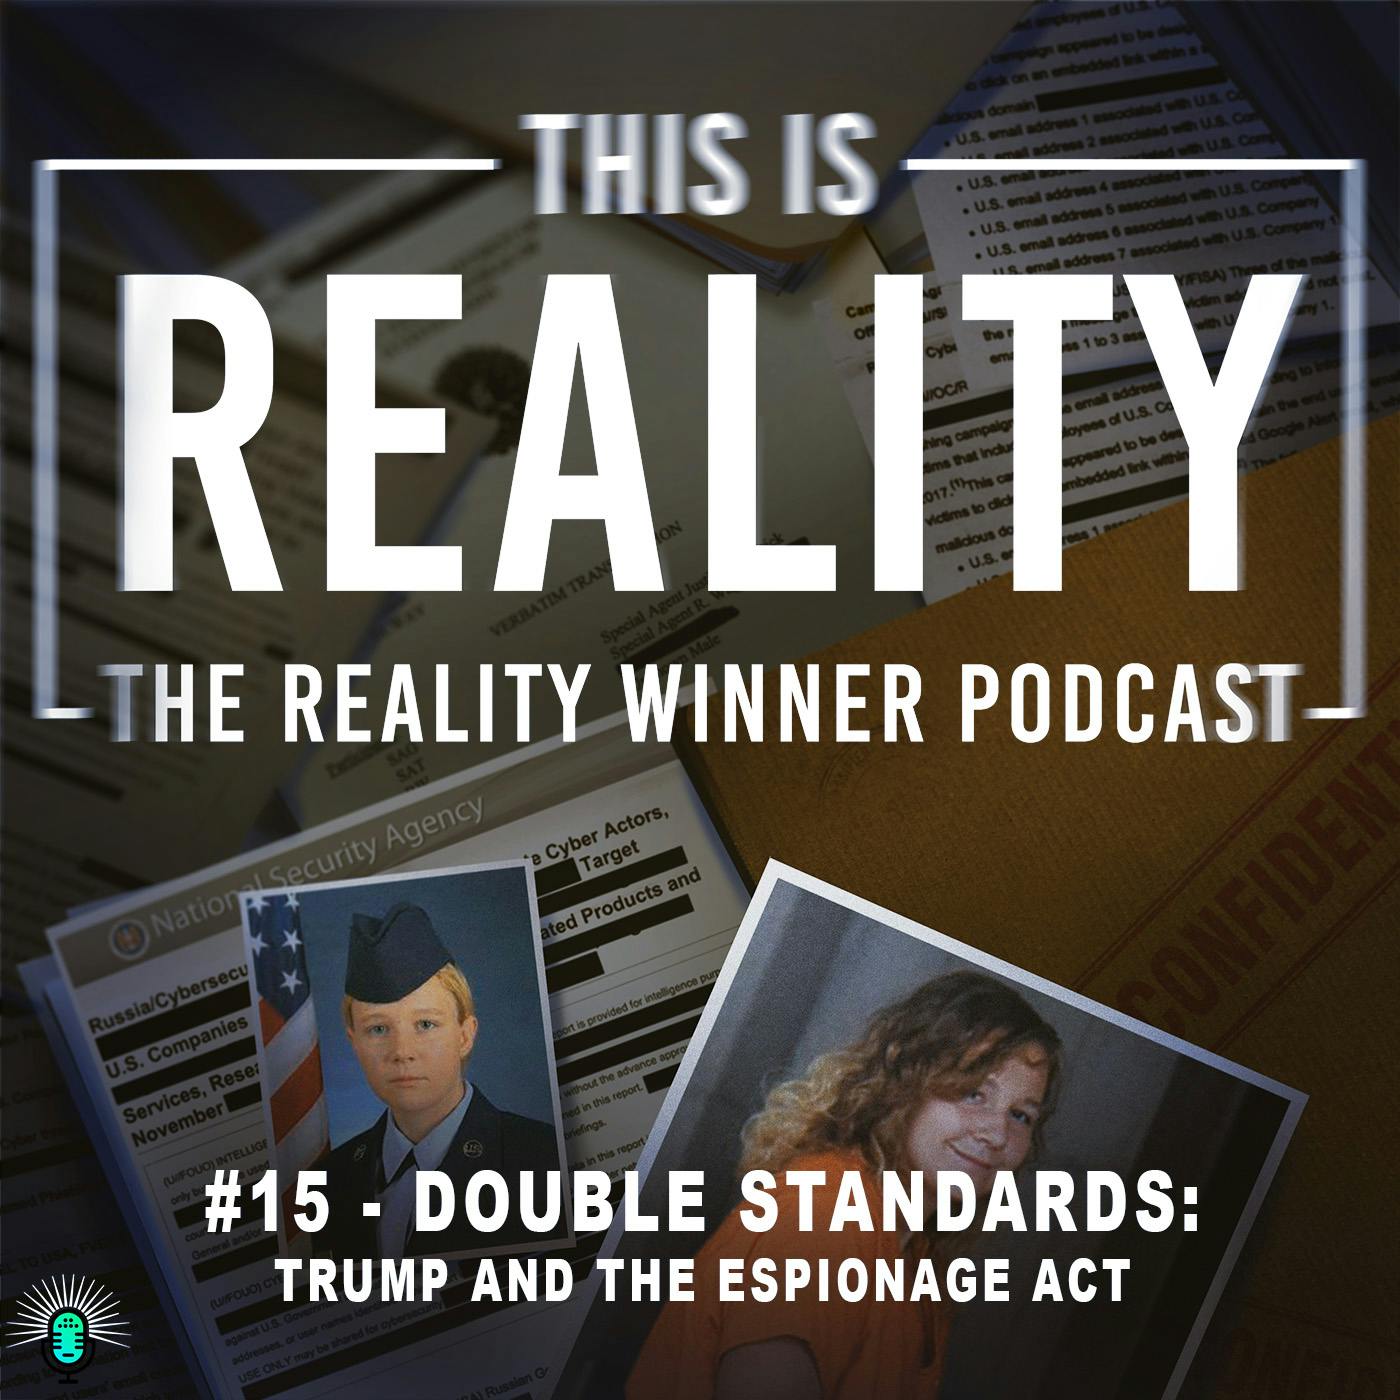 #15 - Double Standards: Trump and the Espionage Act